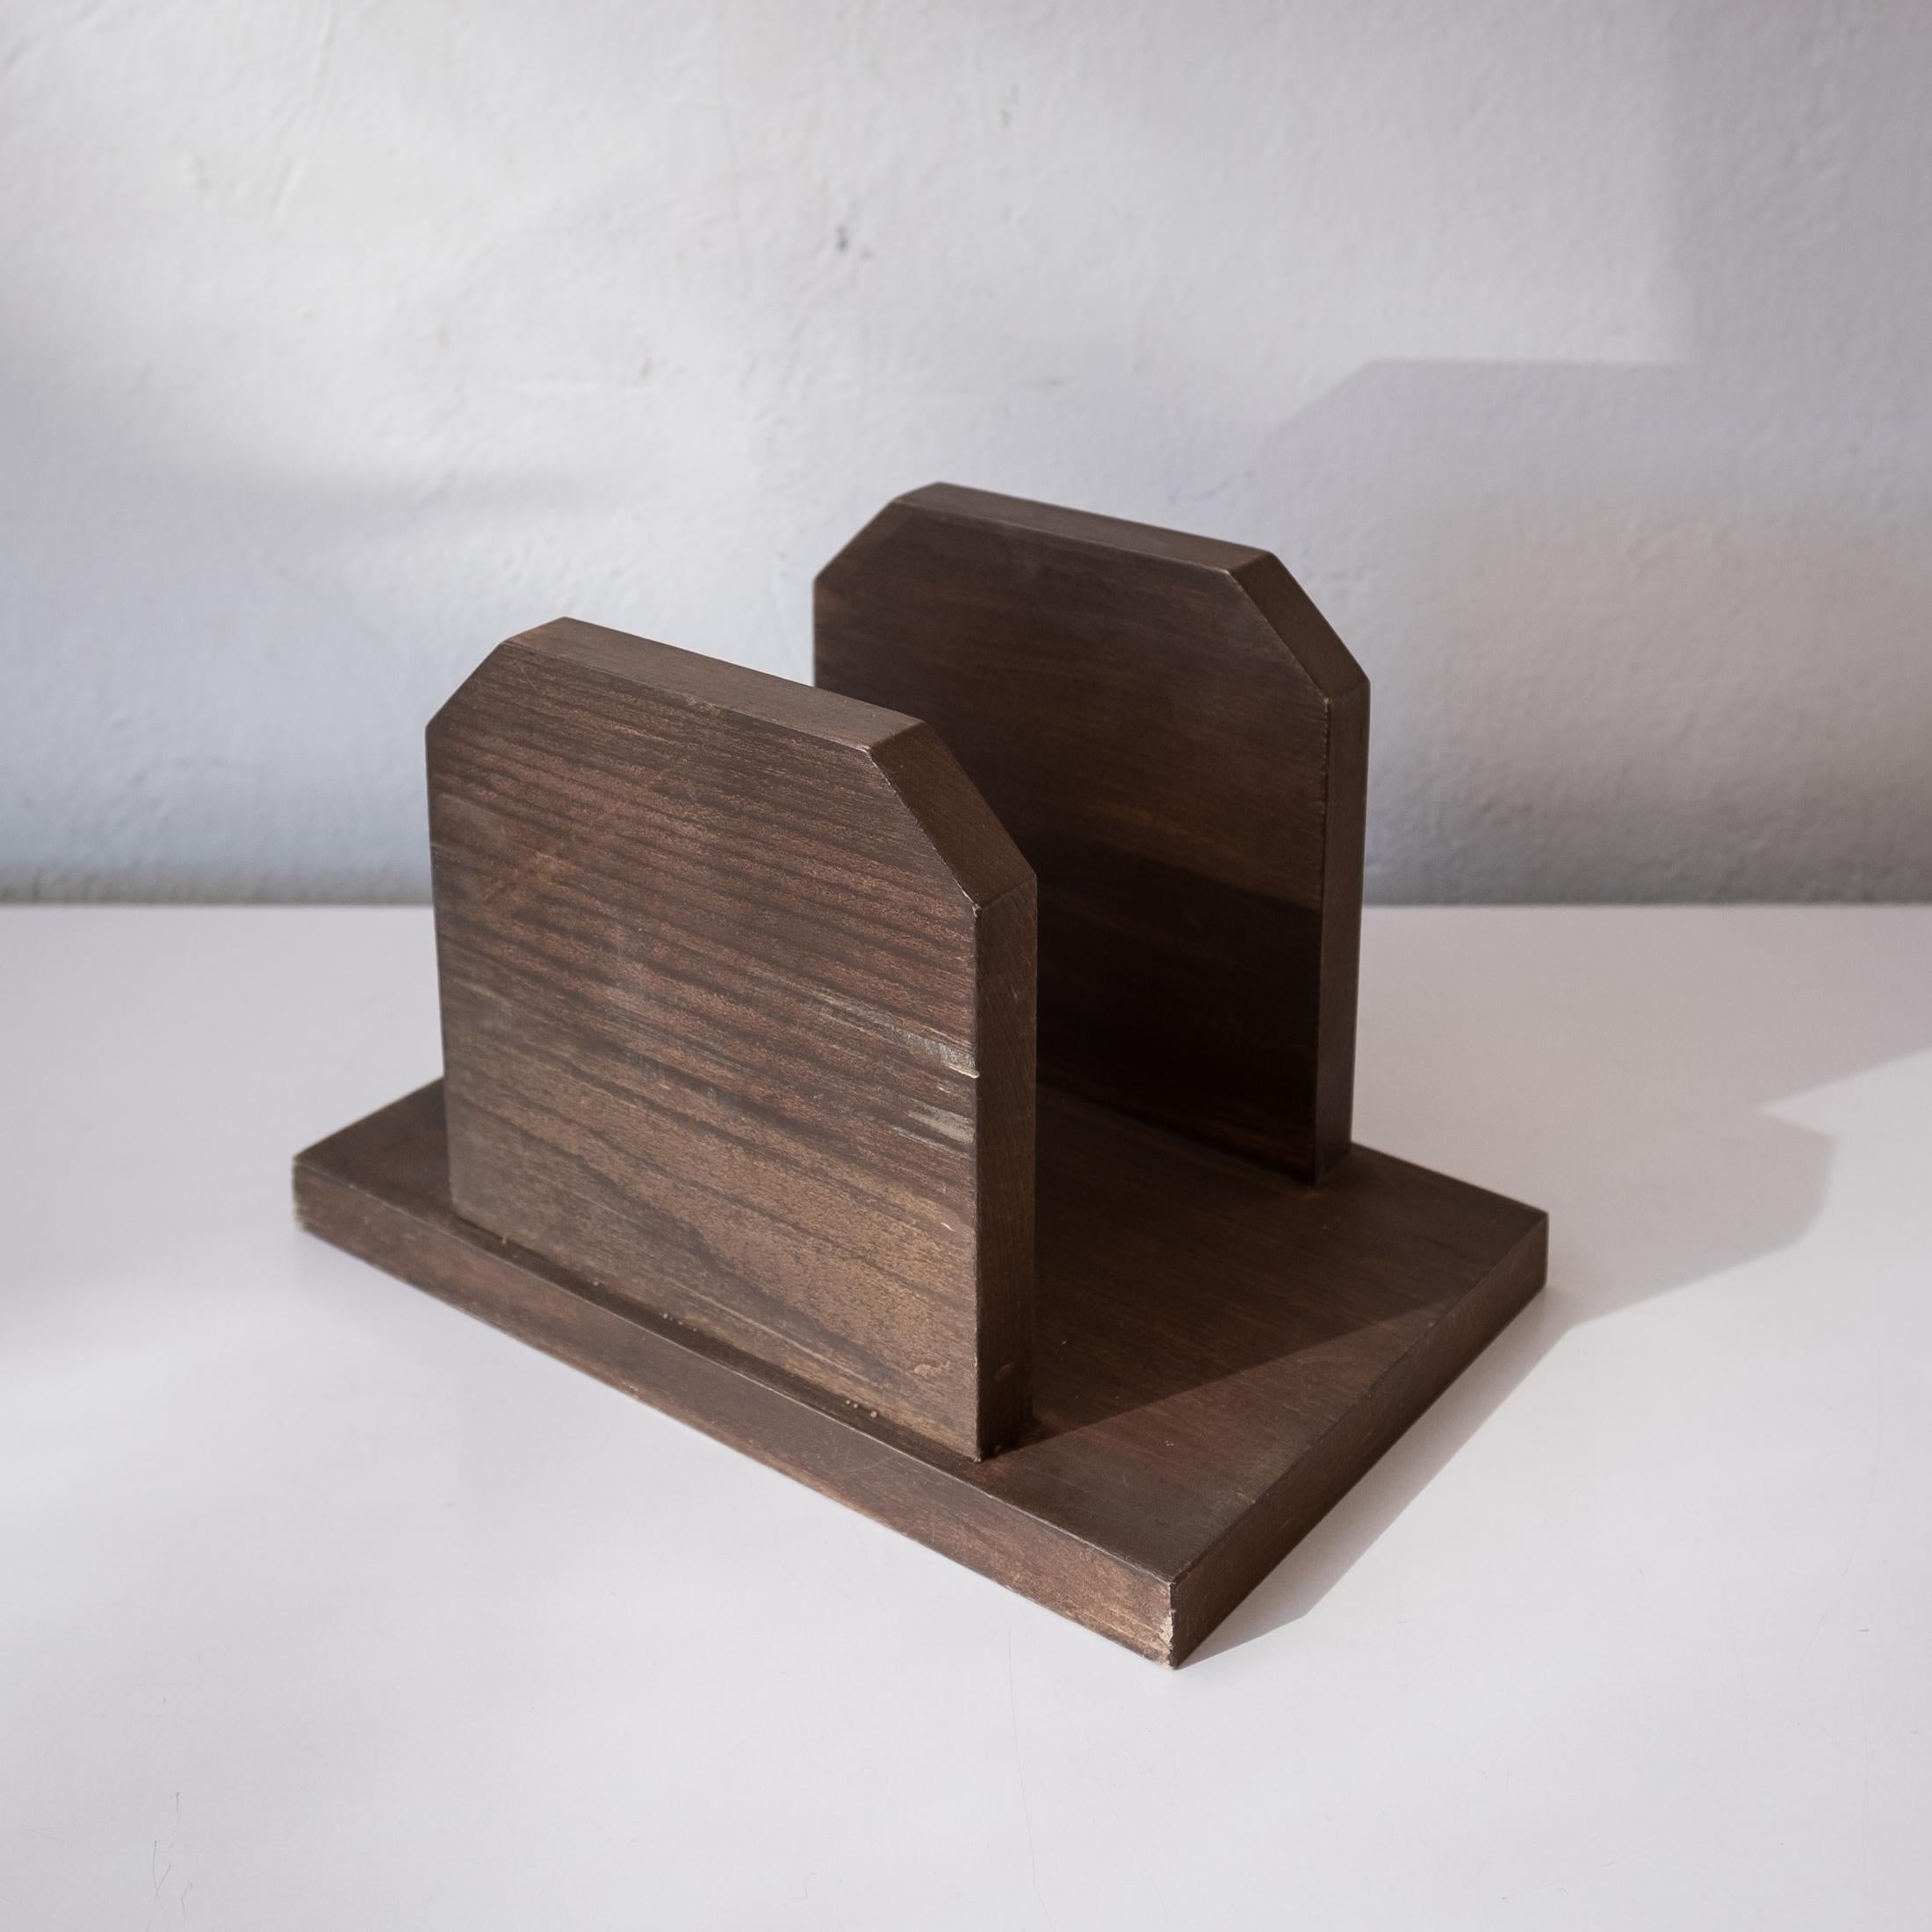 Desktop Book or Mail holder by John Lloyd Wright For Sale 1